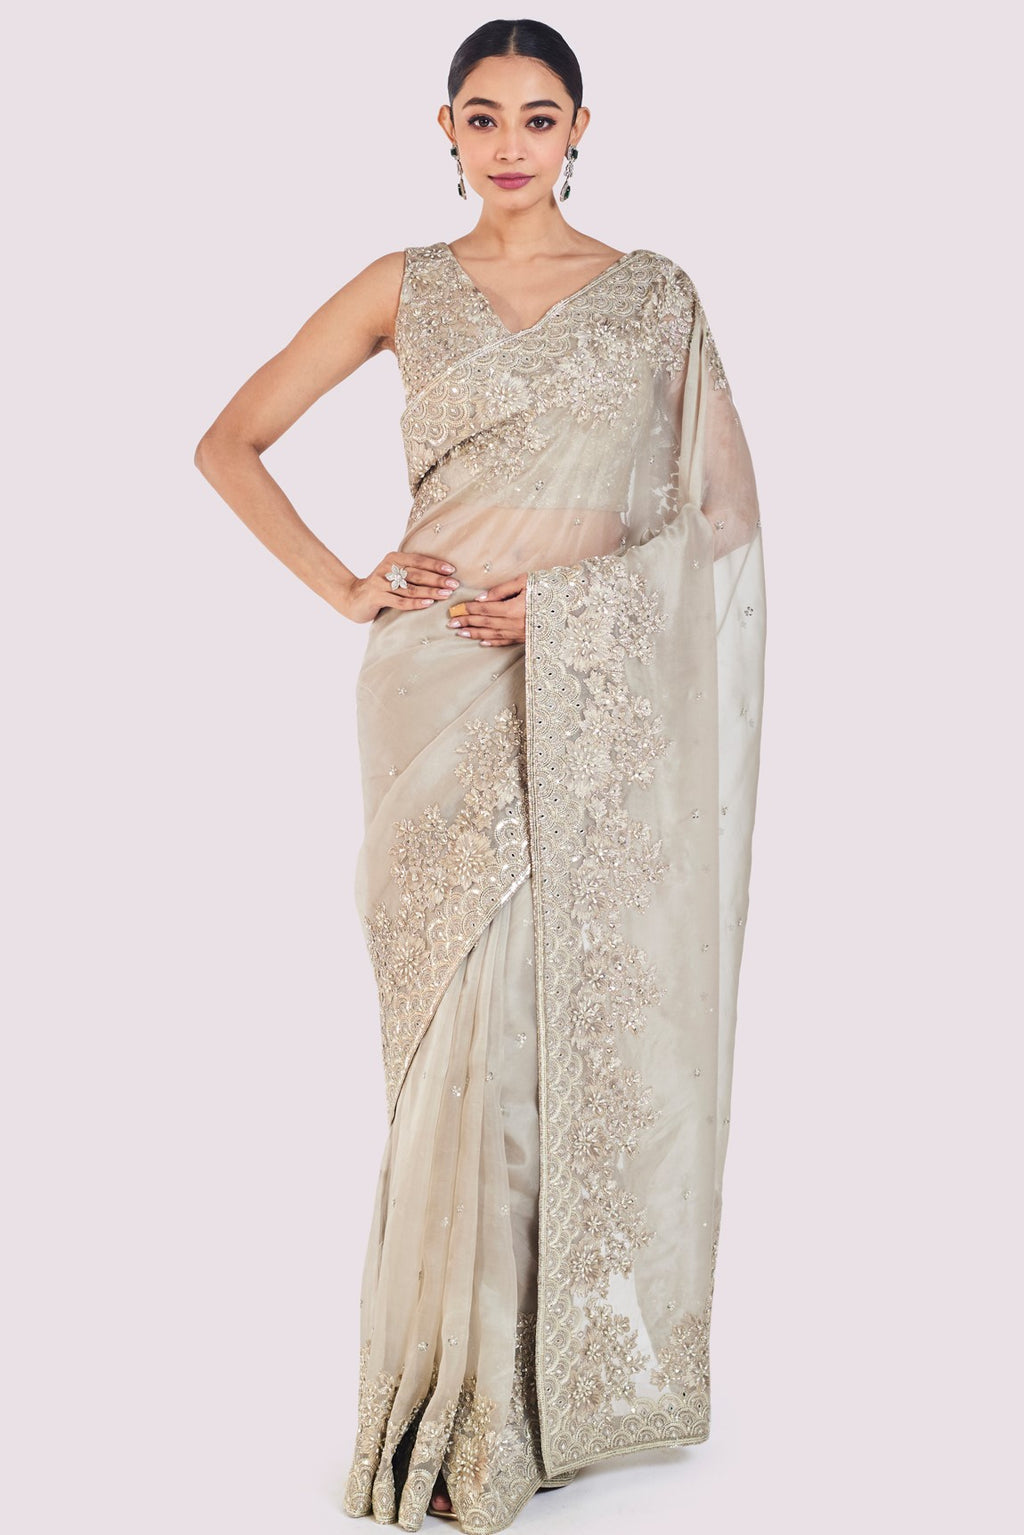 Buy grey embroidered organza saree online in USA with silk blouse. Look your best at parties and weddings in beautiful designer sarees, embroidered sarees, handwoven sarees, silk sarees, organza saris from Pure Elegance Indian saree store in USA.-full view